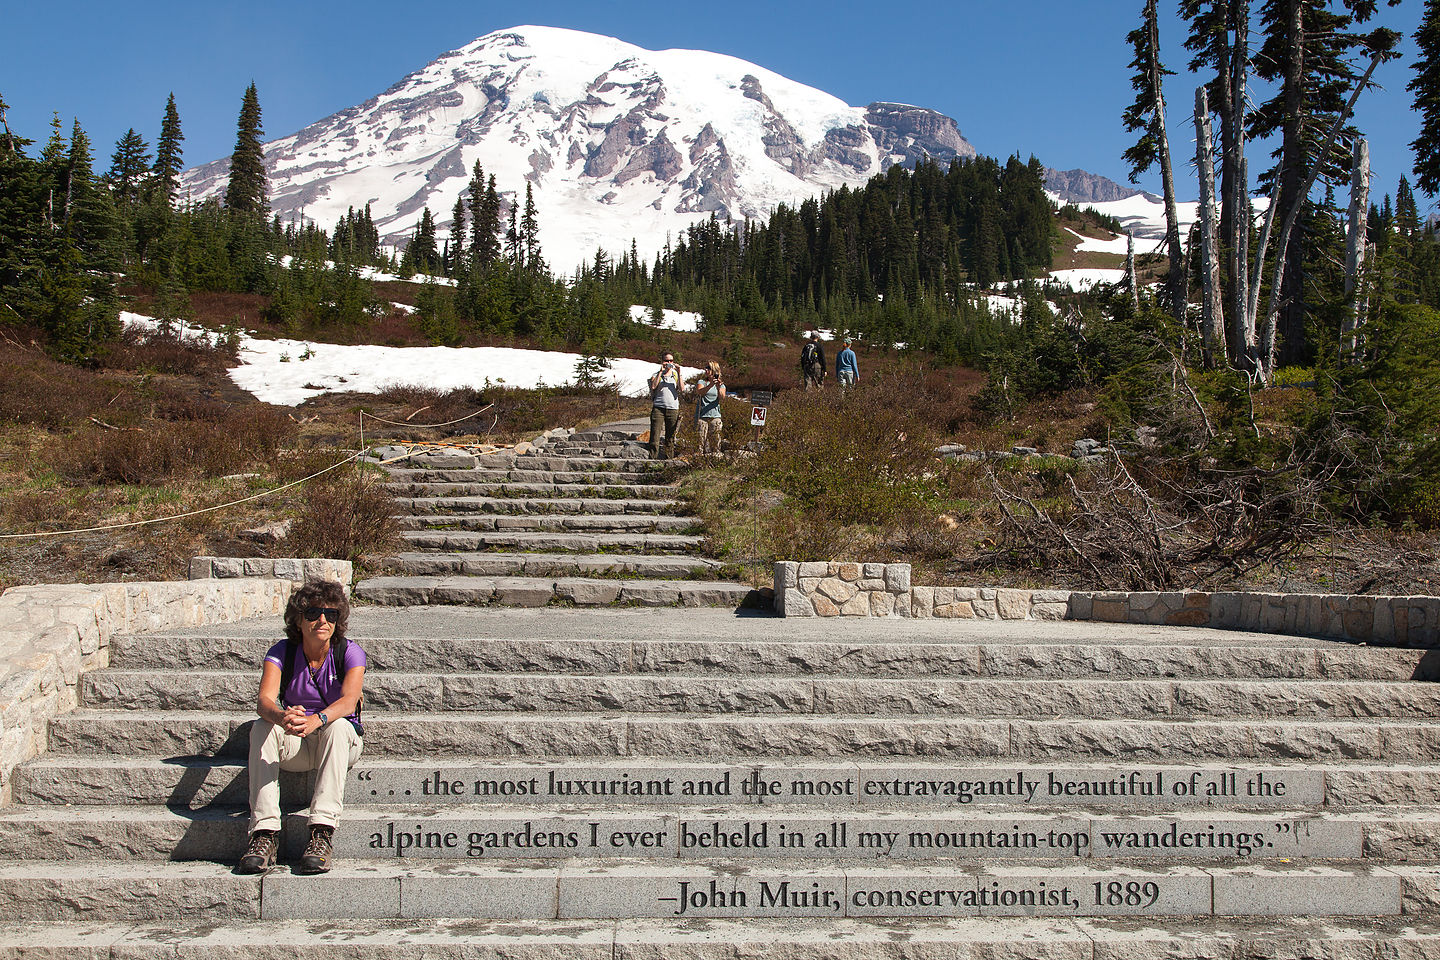 Lolo channeling John Muir for the hike up Mount Rainier